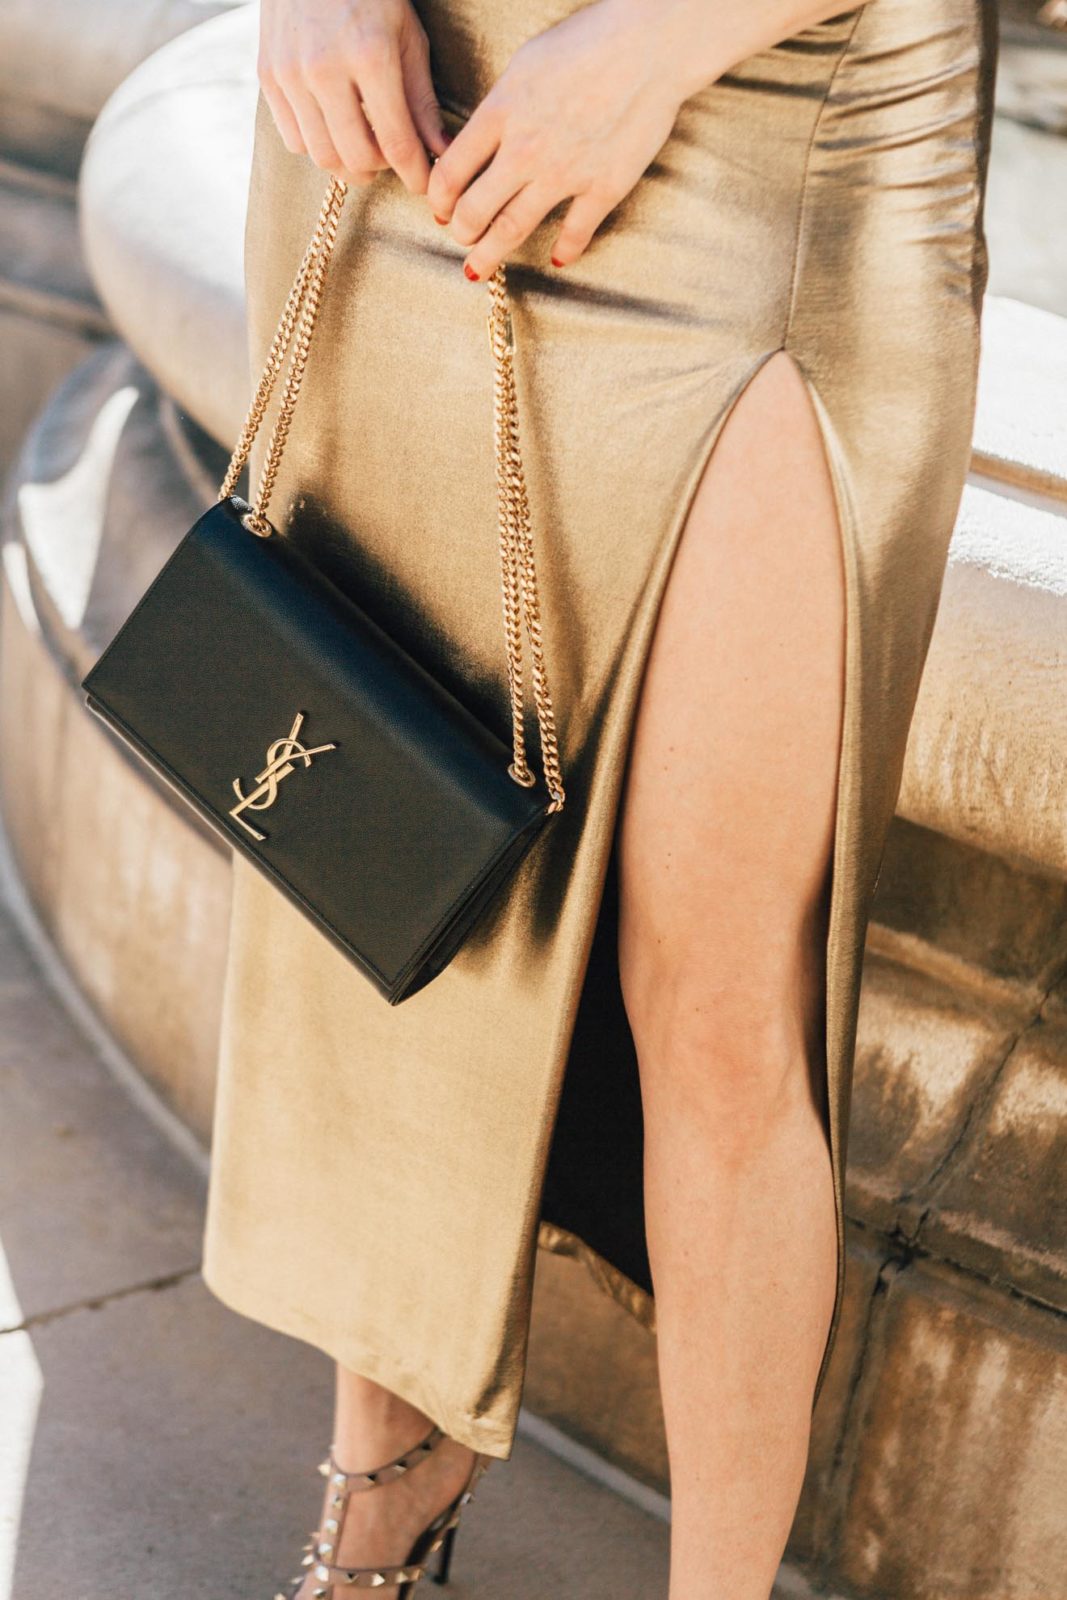 The Ultimate Holiday Outfit Guide by Fashion Blogger Laura Lily, Gold metallic dress | The Ultimate Glam Holiday Outfits Guide by popular Los Angeles fashion blogger, Laura Lily: image of a woman wearing a gold metallic dress and holding a Saint Laurent bag. 